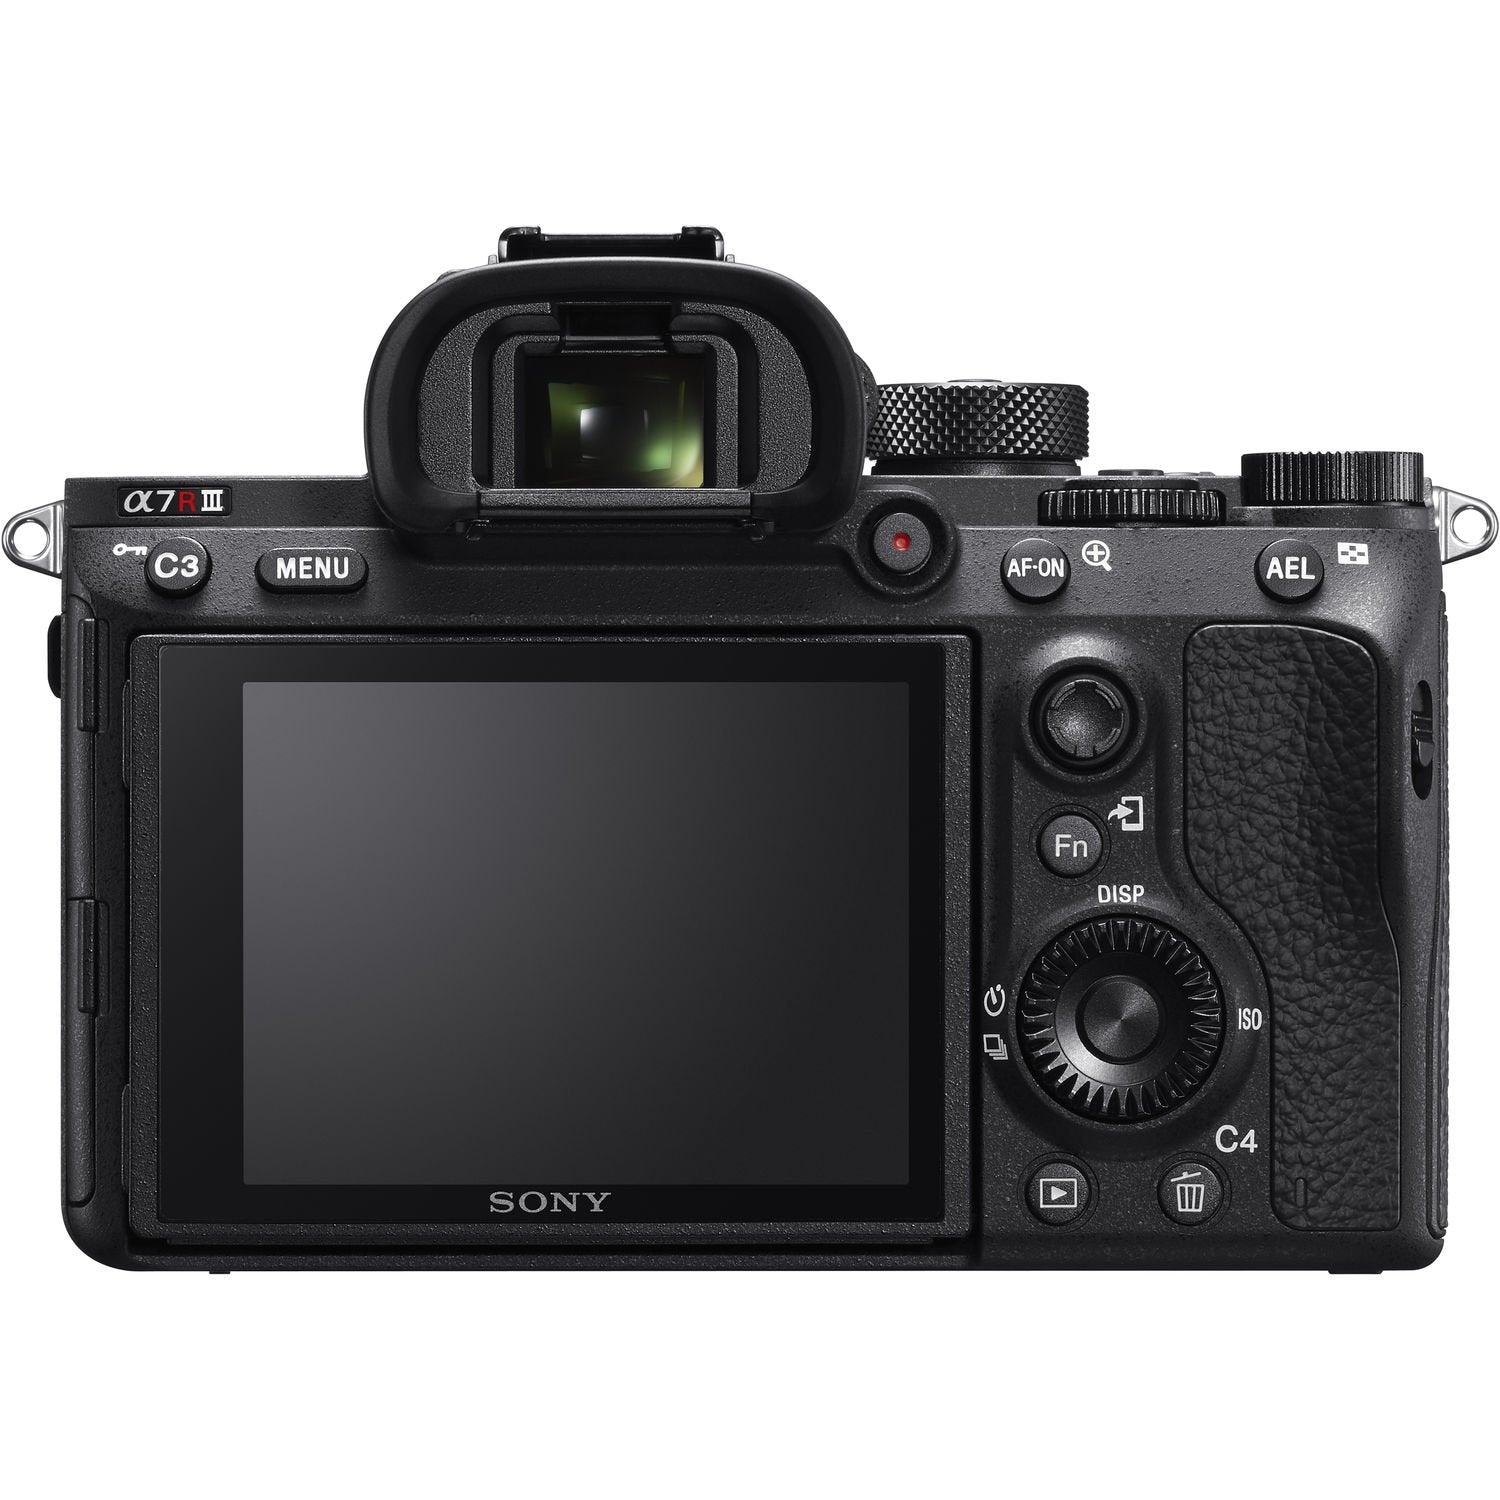 Sony Alpha a7R III Mirrorless Digital Camera (Body Only) + 70-200mm Lens + Filter Kit + Memory Card Kit + Carrying Case